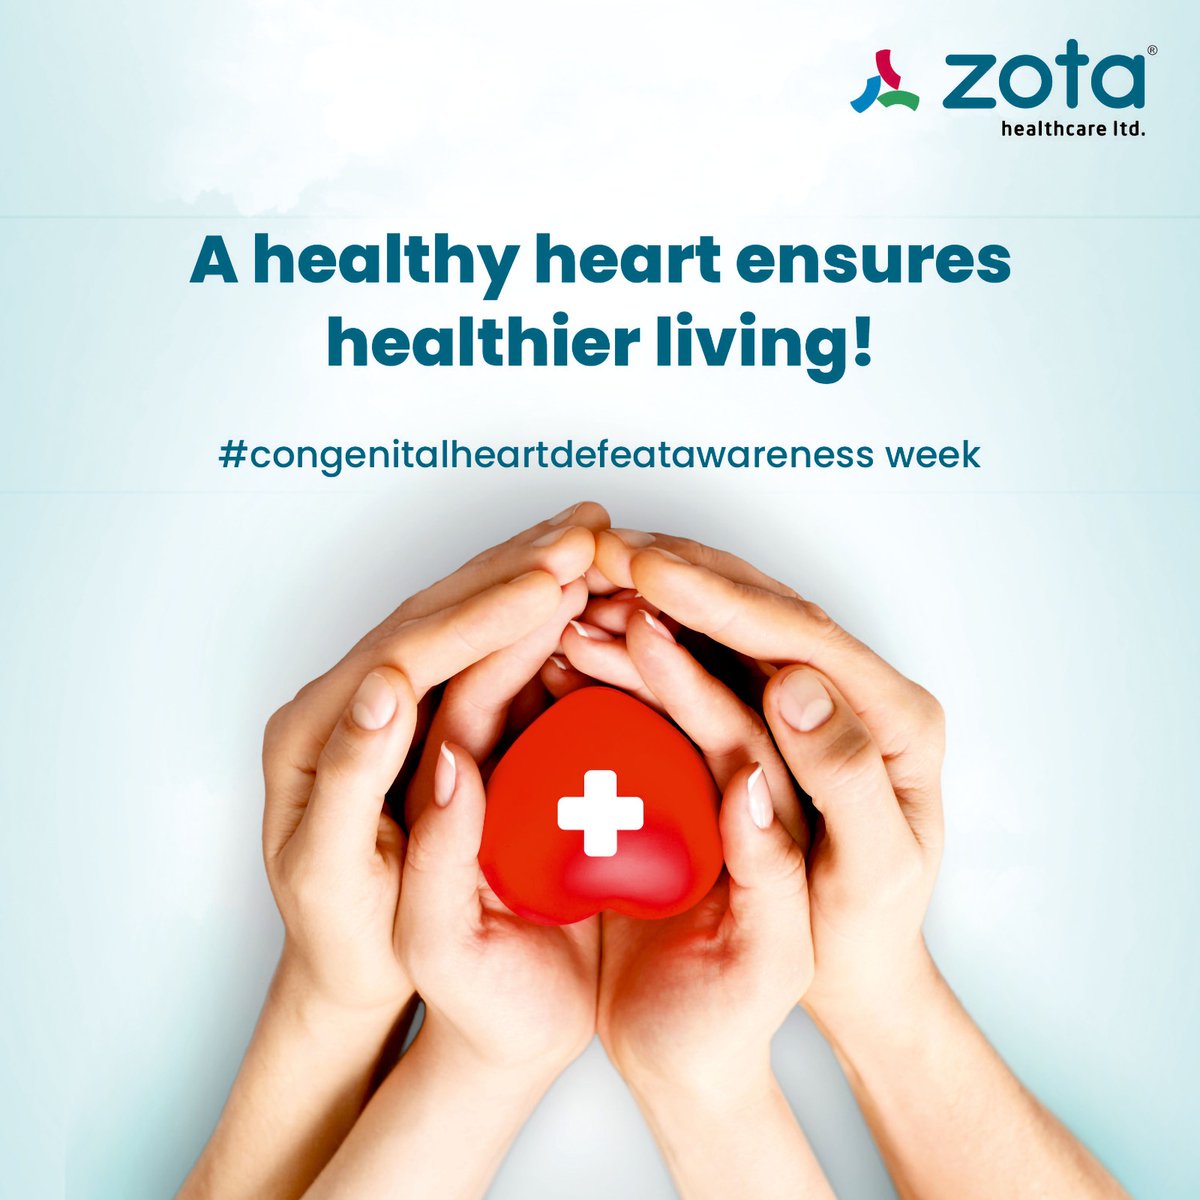 To keep your heart healthy, follow these three steps. Make sure you eat well, get enough sleep, and don't take stress. Zota Healthcare wishes everyone a healthy heart and a happy life.
#heartdisease #heartdiseaseawareness #heartdiseaseprevention #heartdiseases #zotahealthcare